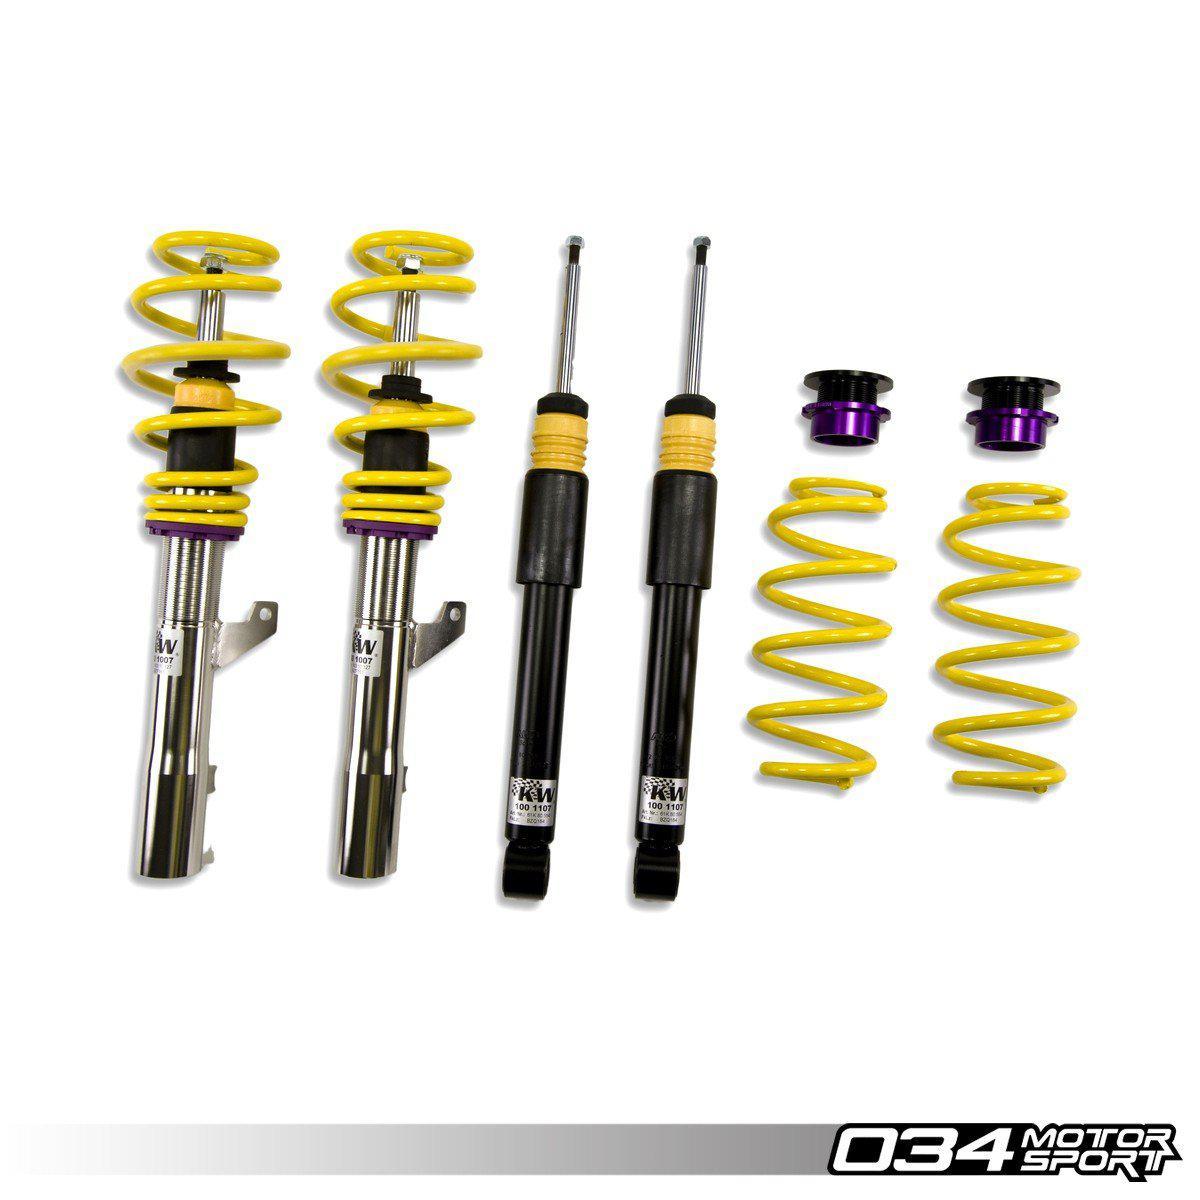 KW Variant 3 Coilover Suspension, 8p Audi A3 Quattro &amp; B6/B7 Volkswagen Passat With Edc-A Little Tuning Co